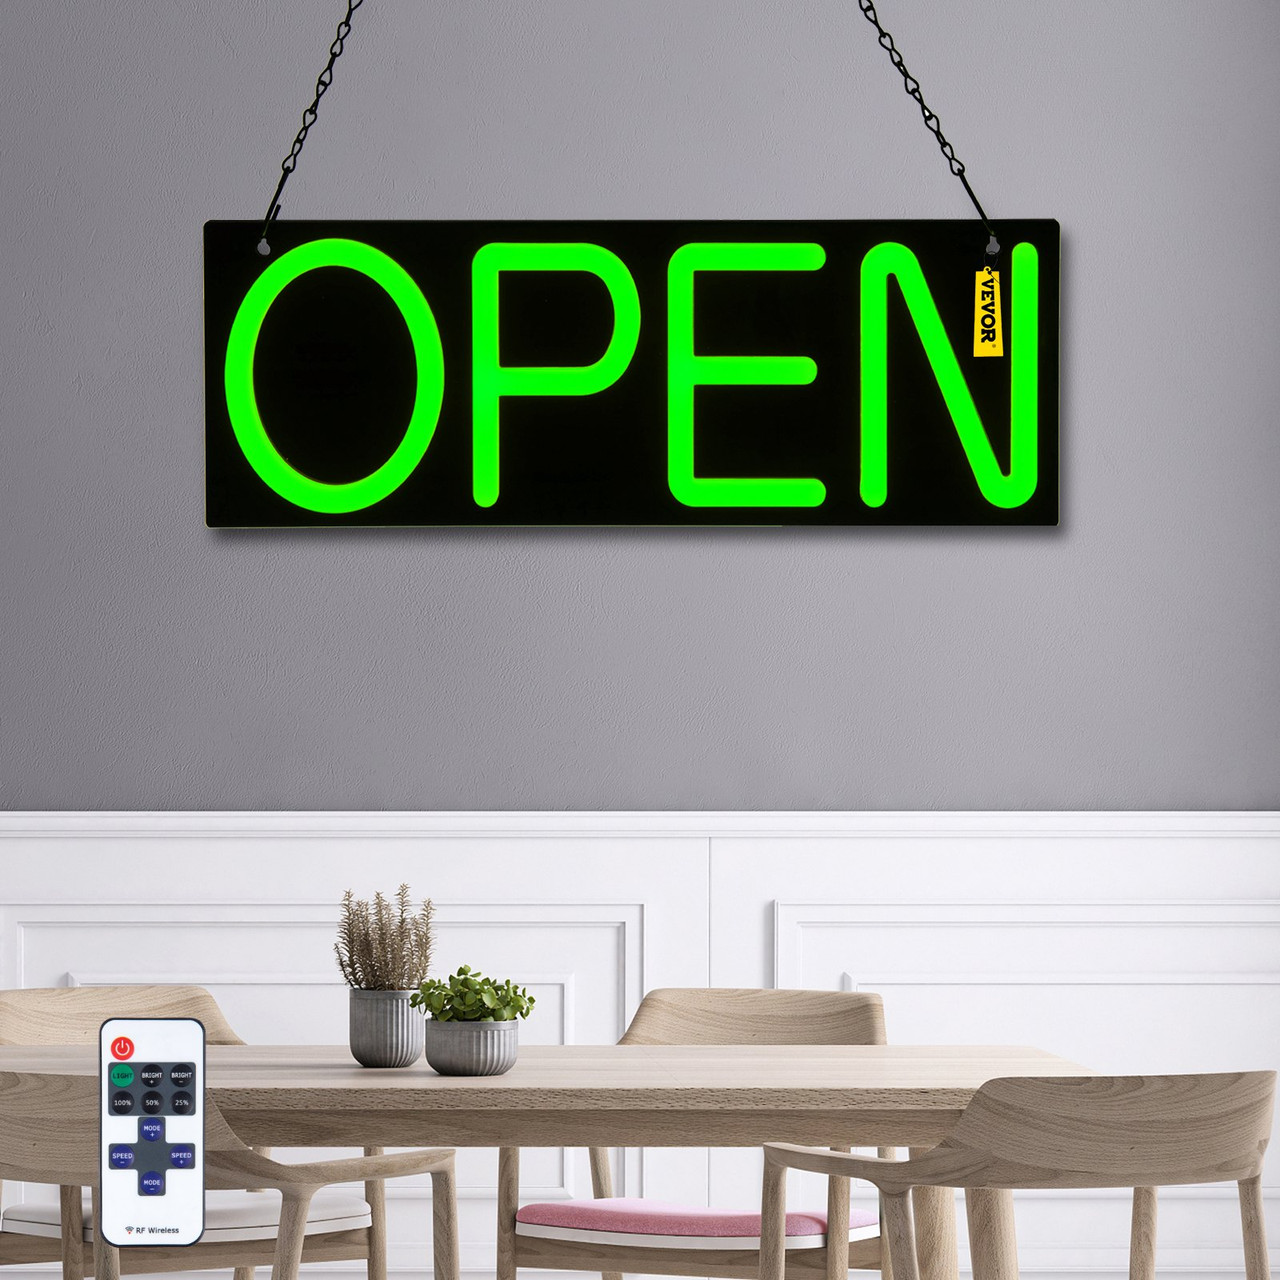 LED Open Sign, 20" x 7" Neon Open Sign for Business, Adjustable Brightness Green Neon Lights Signs with Remote Control and Power Adapter, for Restaurant, Bar, Salon, Shop, Hotel, Window, Wall